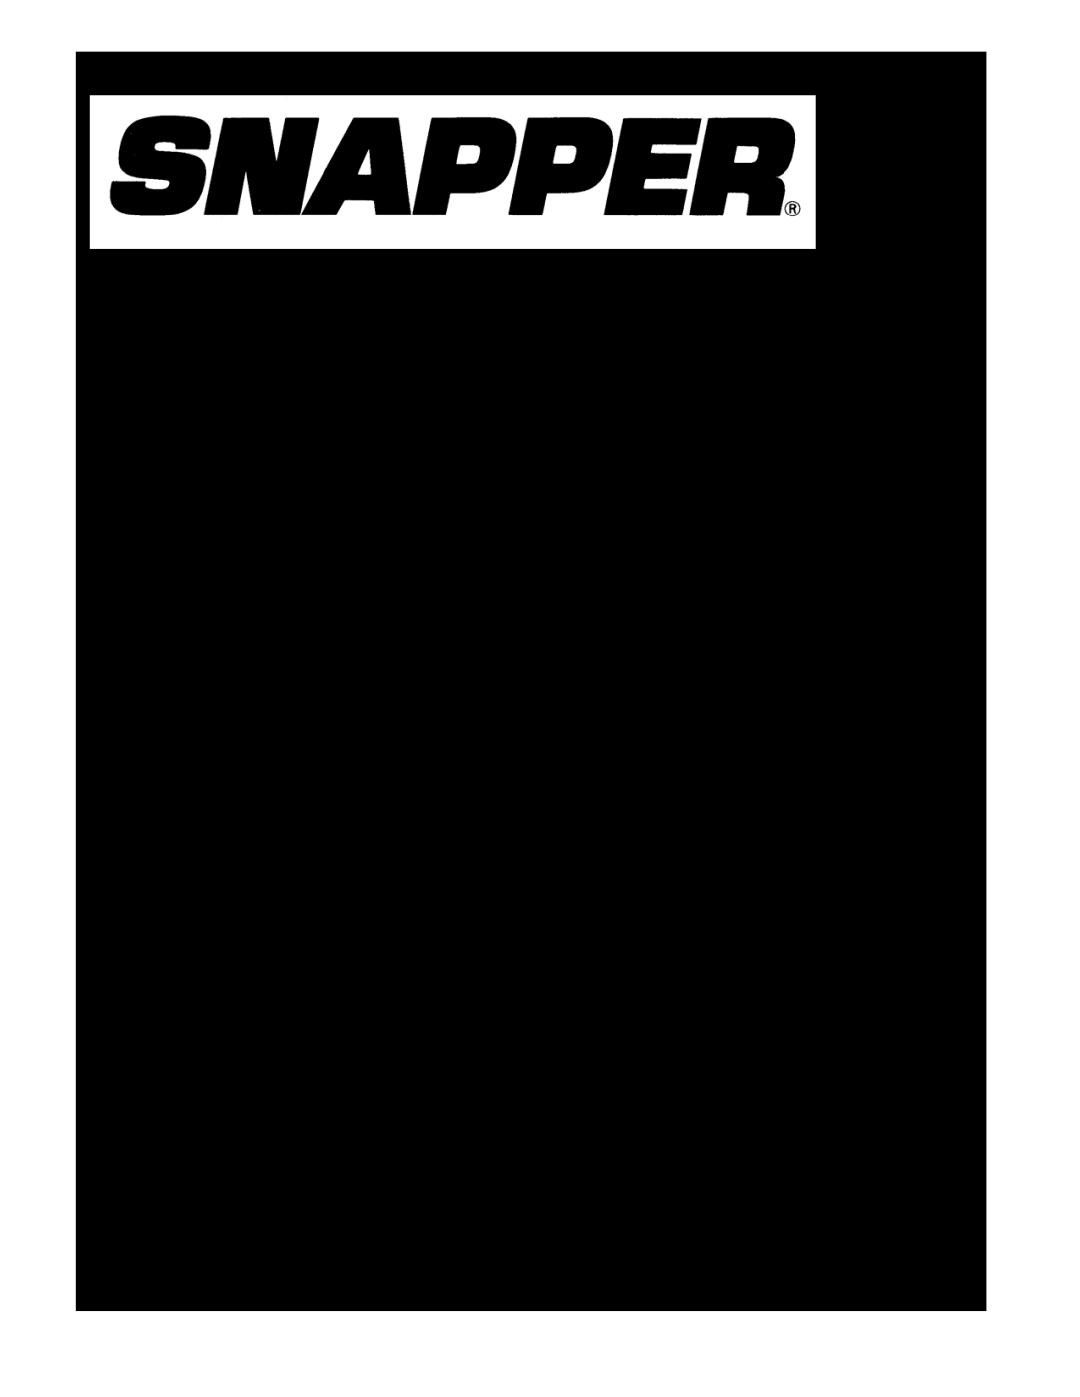 Snapper 1696012 manual Reproduction, 26, 28 & 30 TWO STAGE LARGE FRAME SNOWTHROWERS, Parts Manual for, Manual No, 7105286 